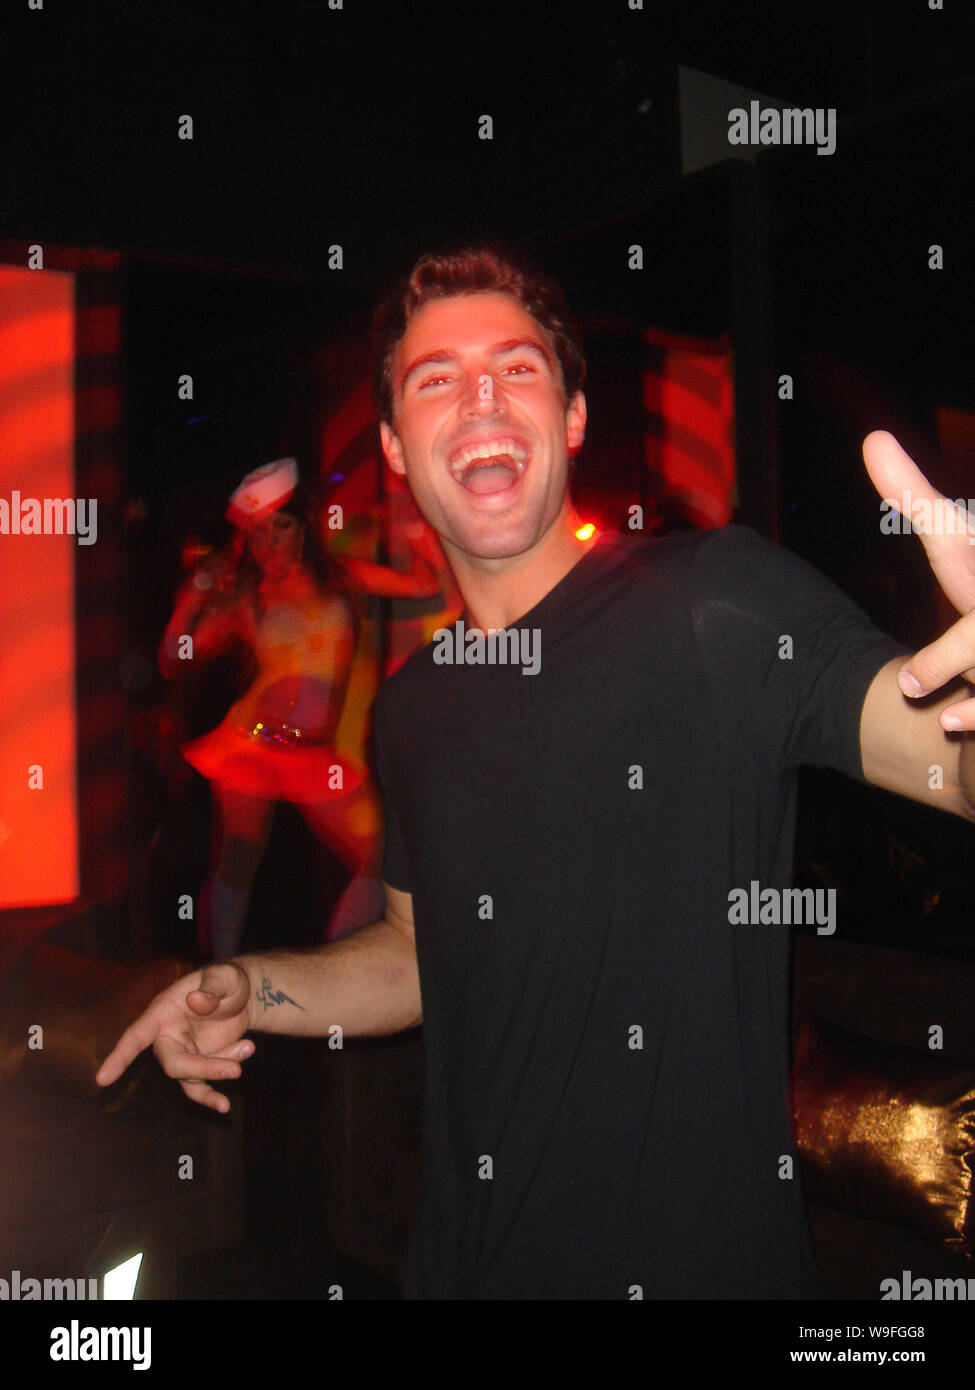 Miami, United States Of America. 12th Oct, 2008. Jenner_Karu_101108_02_EXCLUSIVE COVERAGE MIAMI, FL - OCTOBER 12 (EXCLUSIVE COVERAGE) TV personality Brody Jenner Parties the night away at Karu & Y Nightclub on October 12, 2008 in Miami, Florida City. People: Brody Jenner Stock Photo